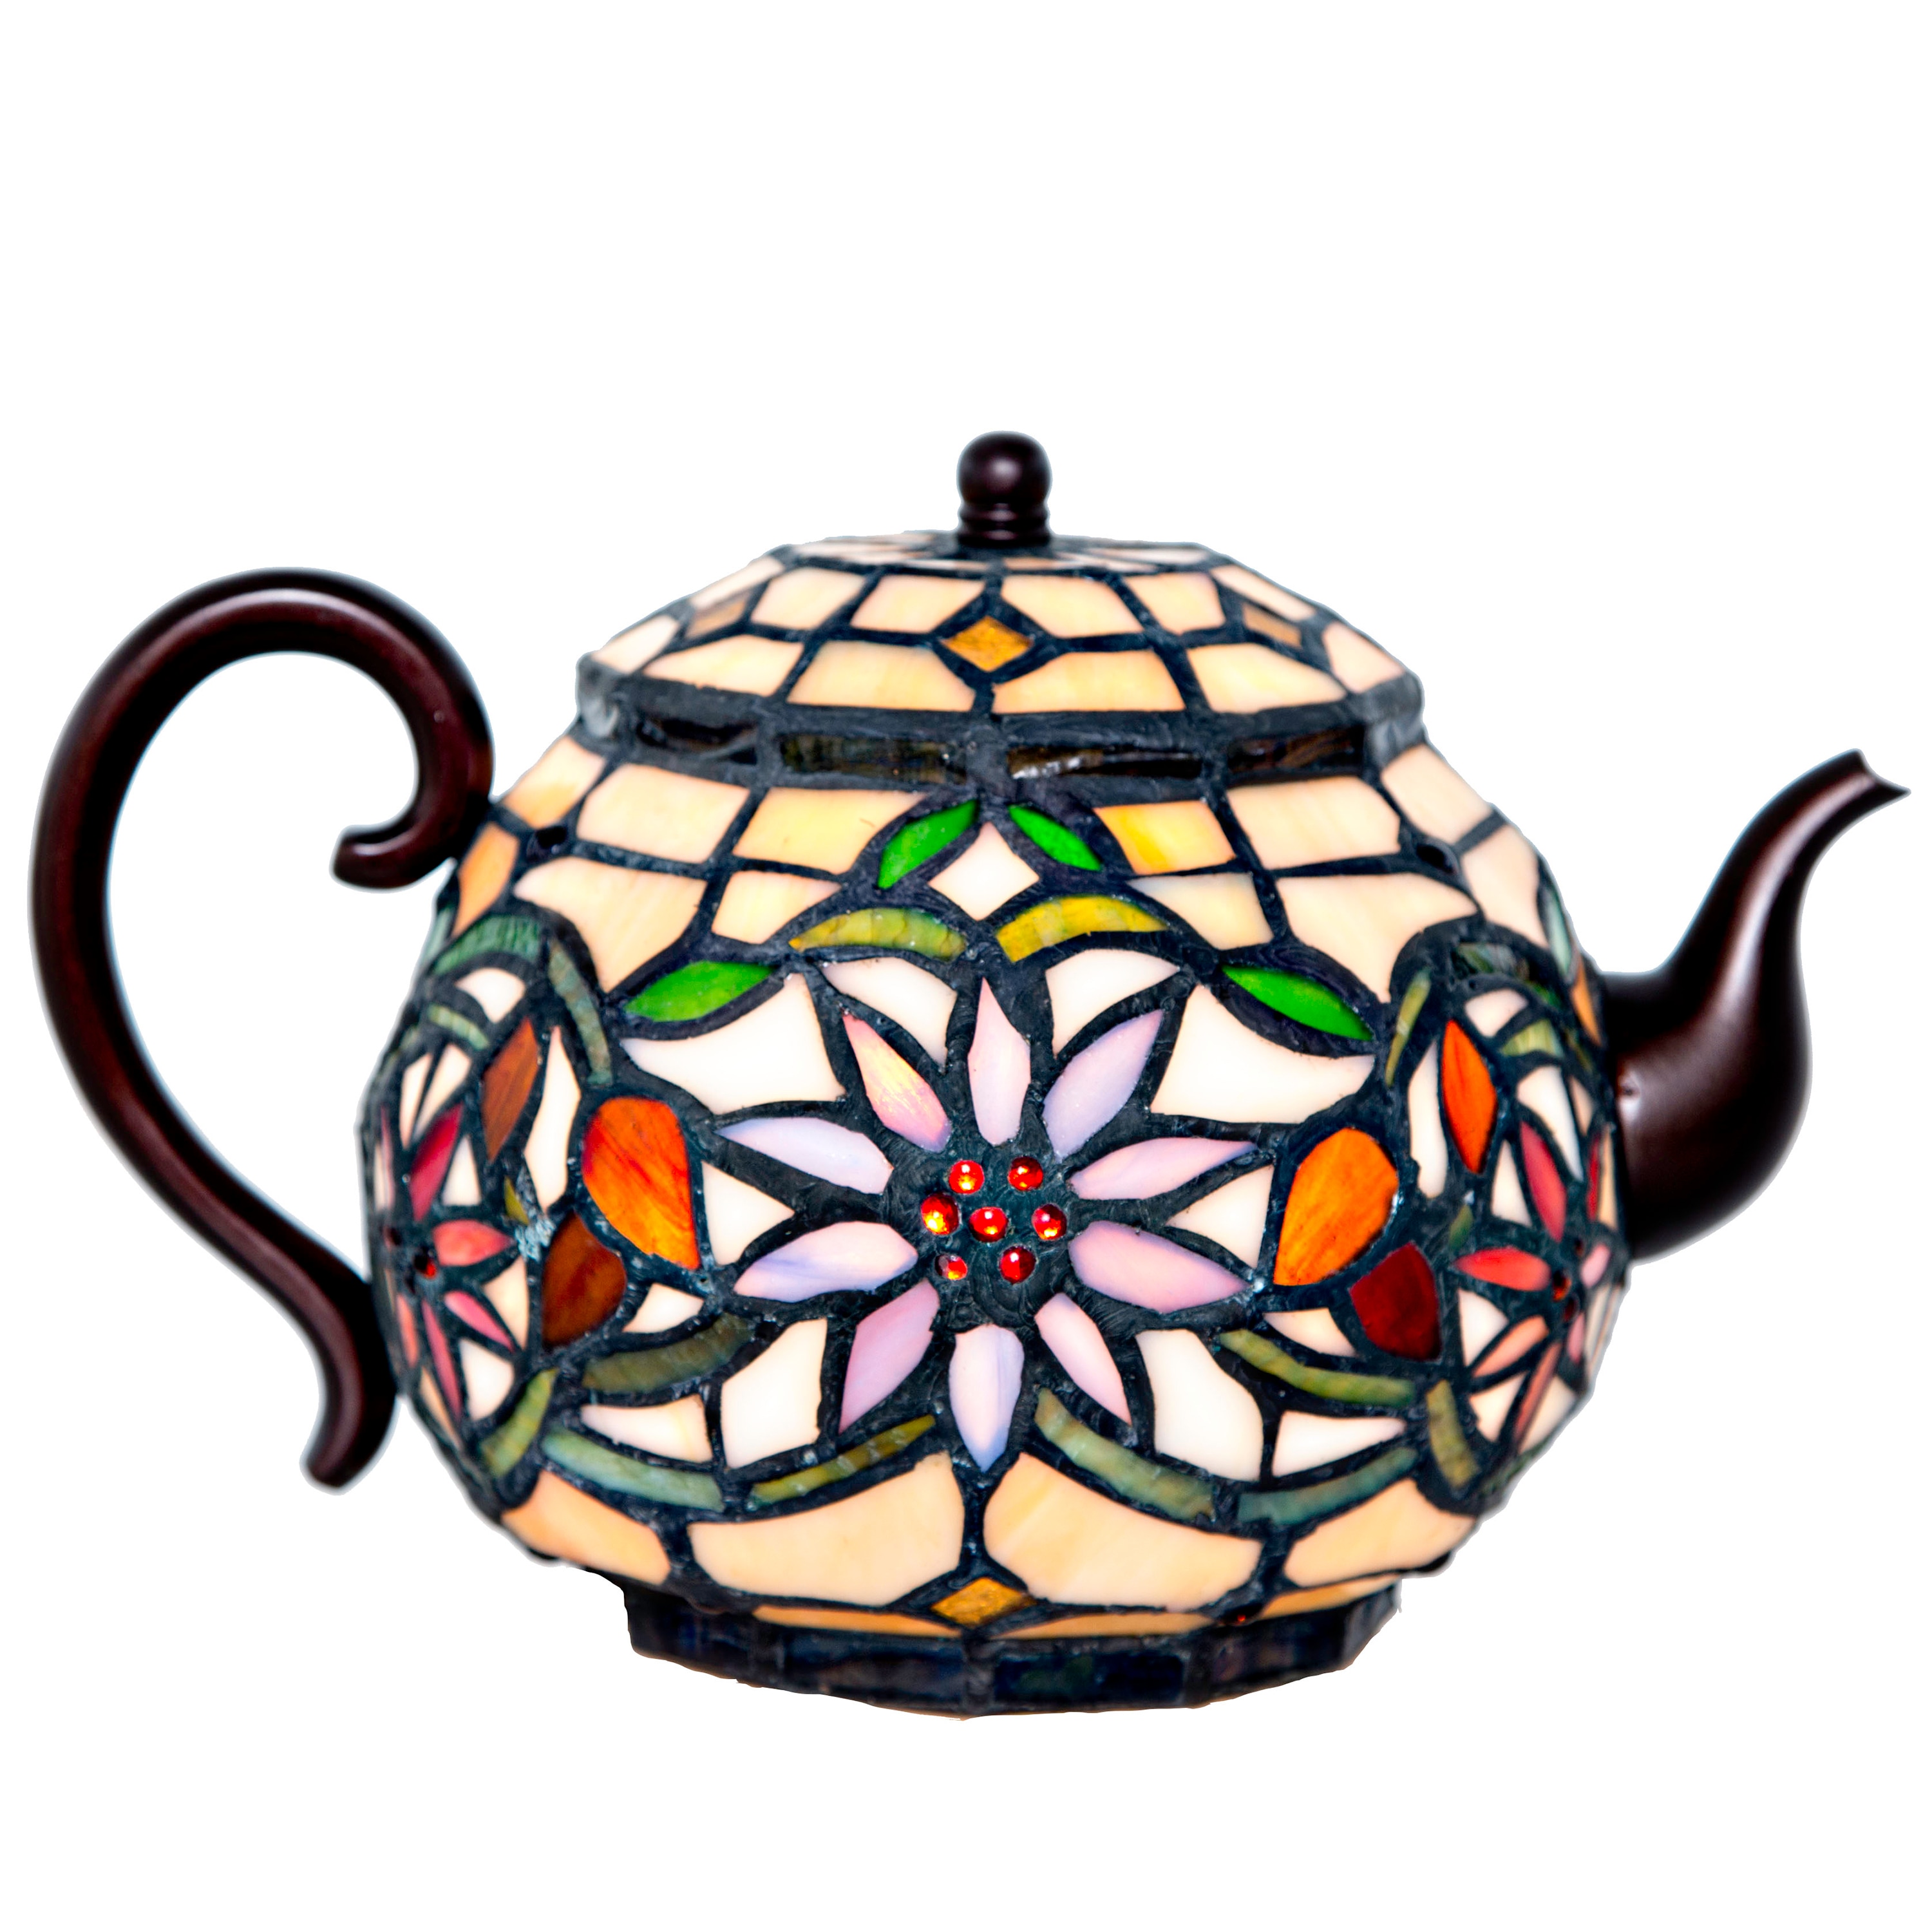 River of Goods English Garden Teapot 6.5-in Multi Color Stained Glass, Oil Rubbed Bronze LED Table Lamp with Glass Shade